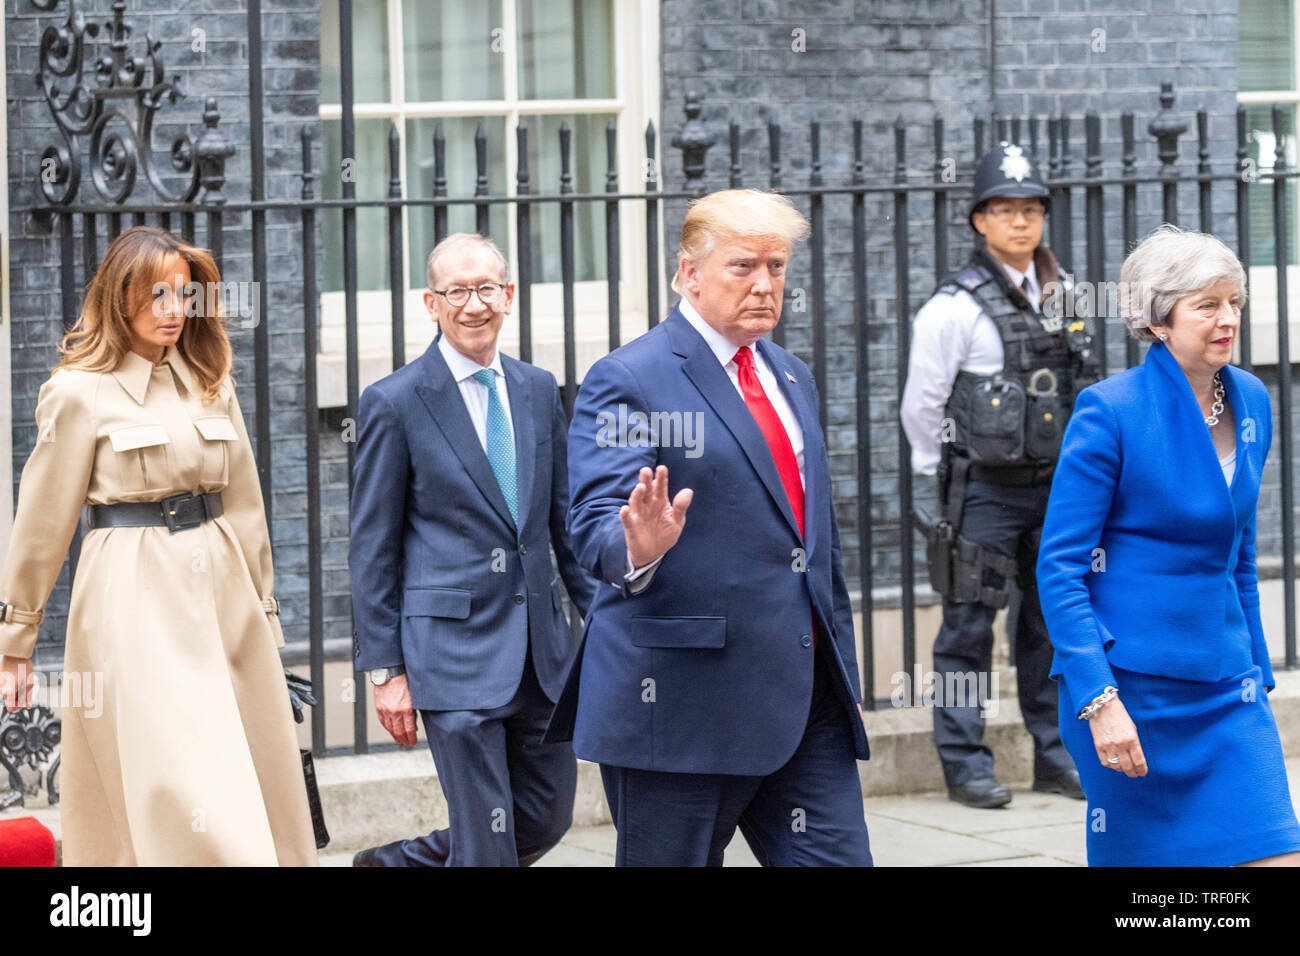 London 4th June 2019  President Trump visits Theresa May MP PC, Prime Minister in Dowing Street  Donald Trump and Theresa May leave 10 Downing Street for a press conferencce  Credit Ian Davidson Alamy Live News Stock Photo